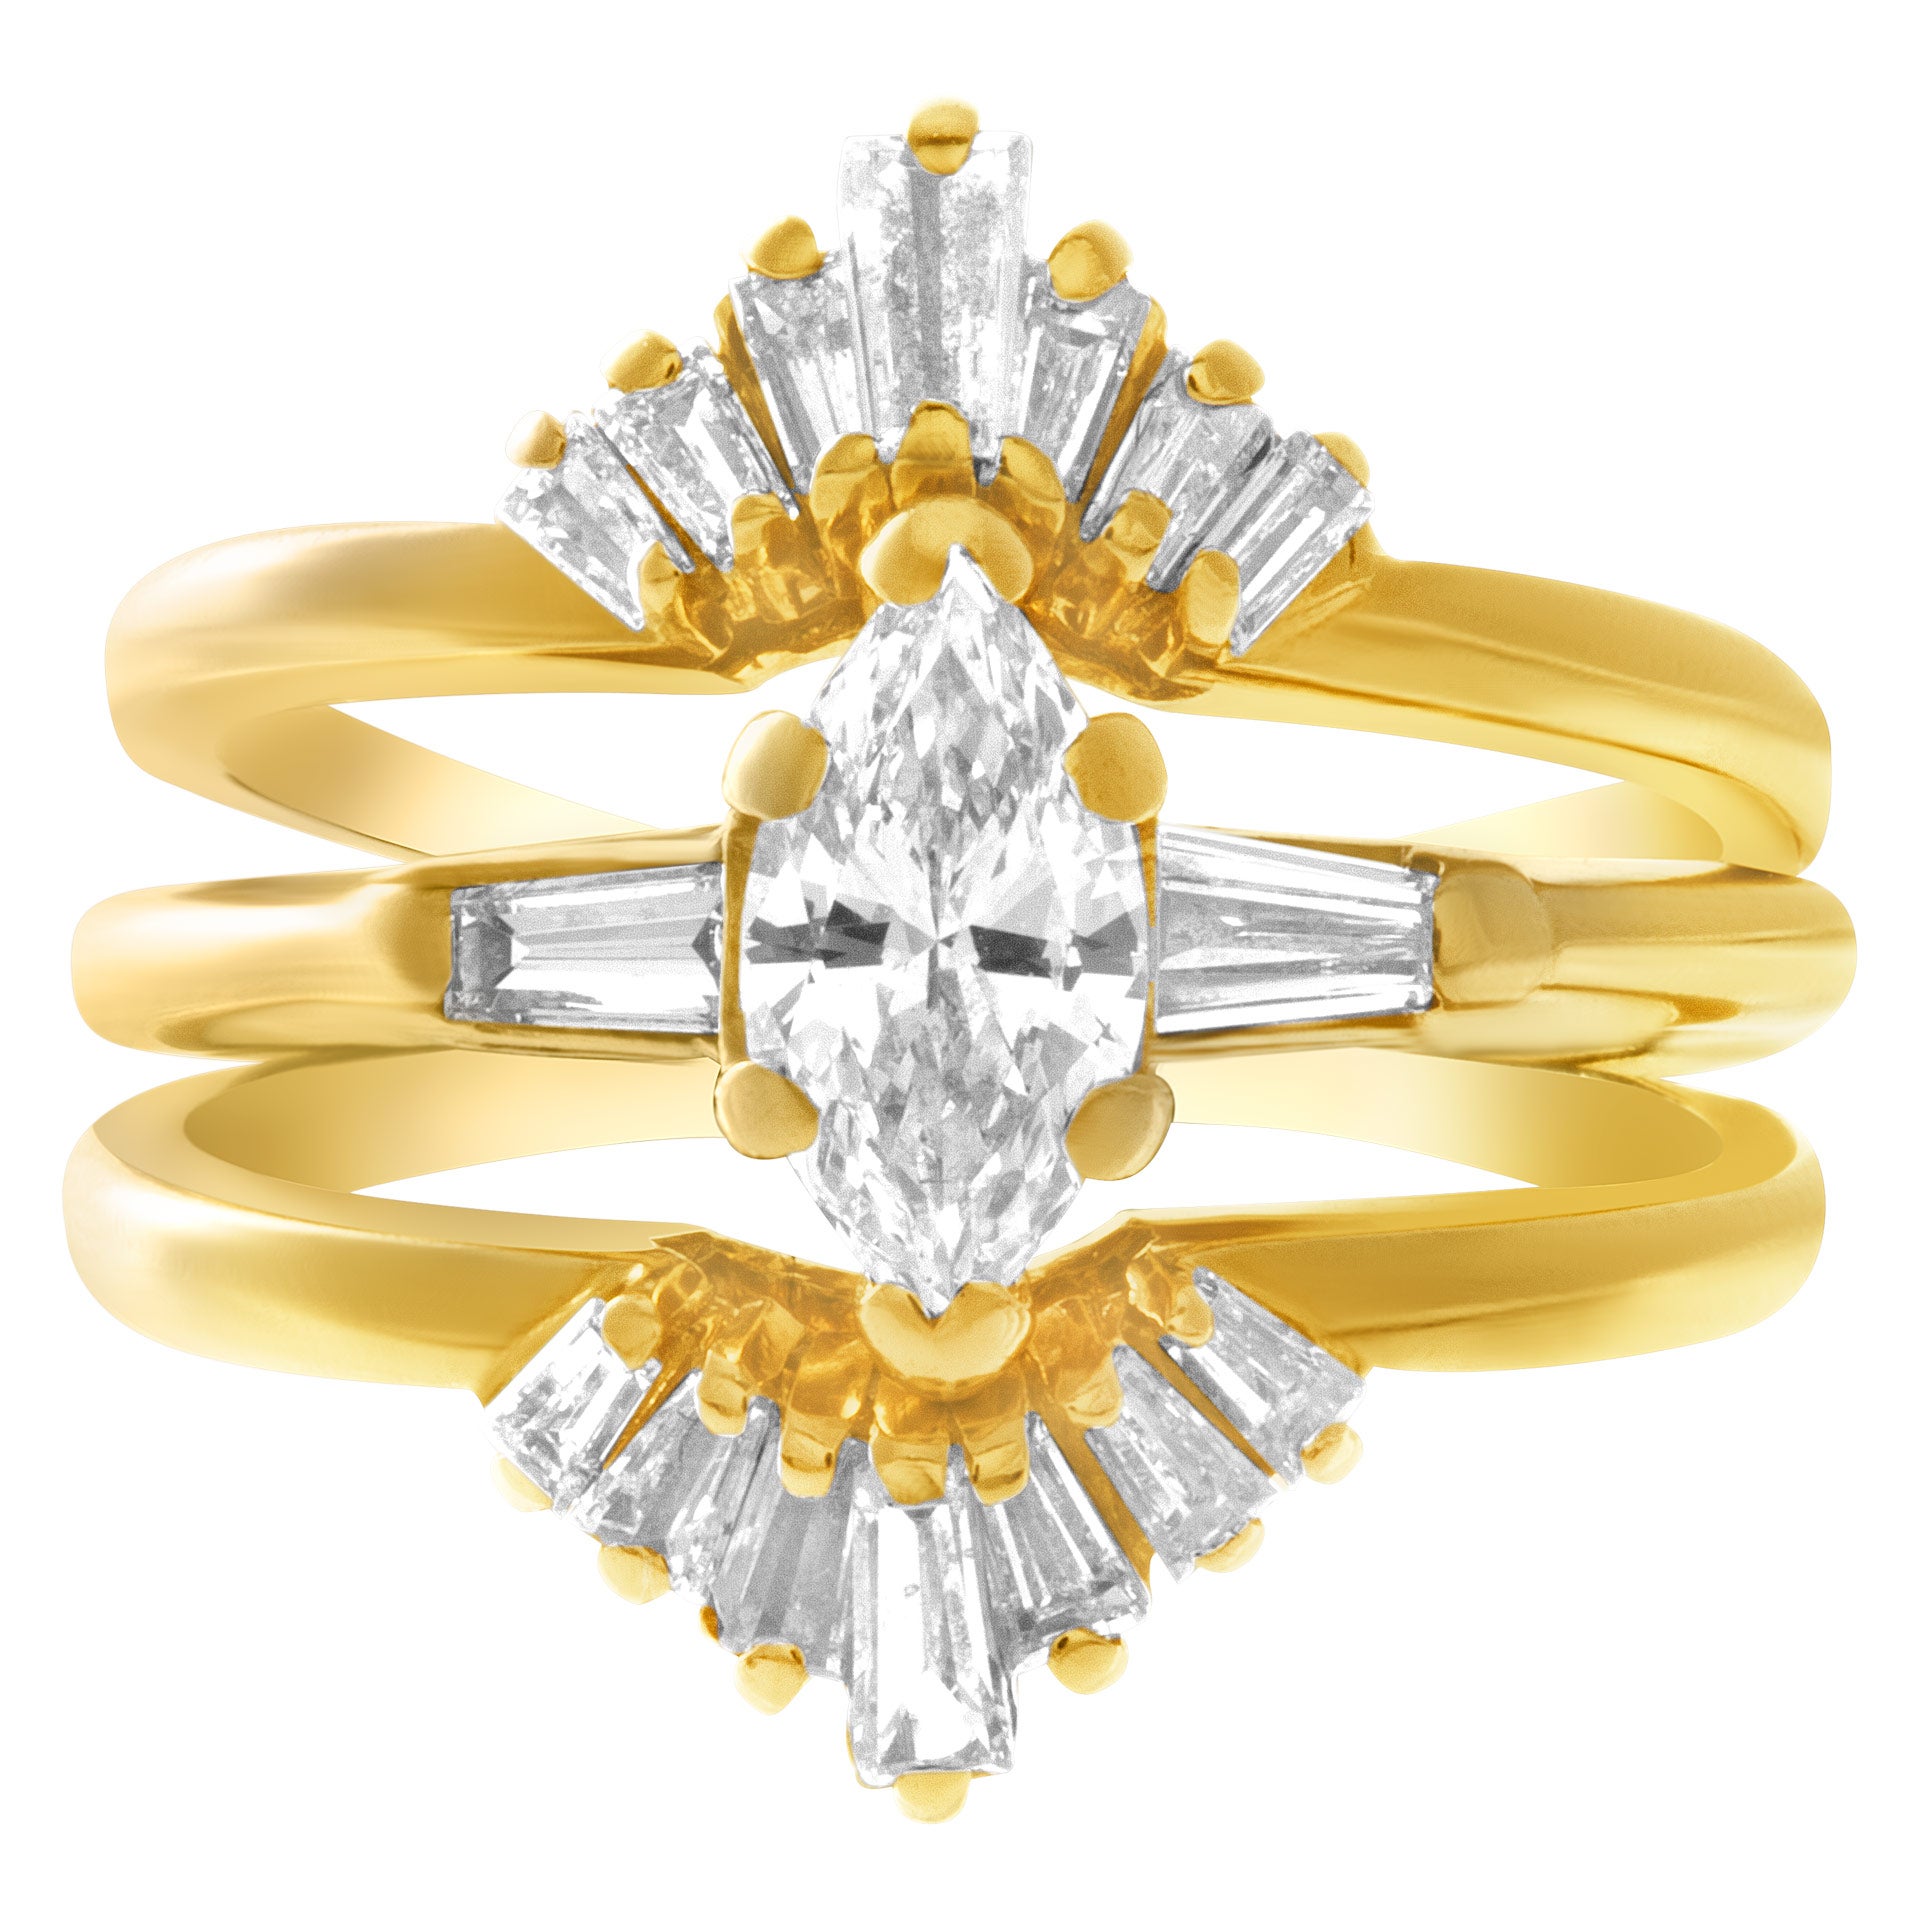 Marquise & Baguette Diamond Ring Set in 14k Yellow Gold. 0.90 Carats For Sale